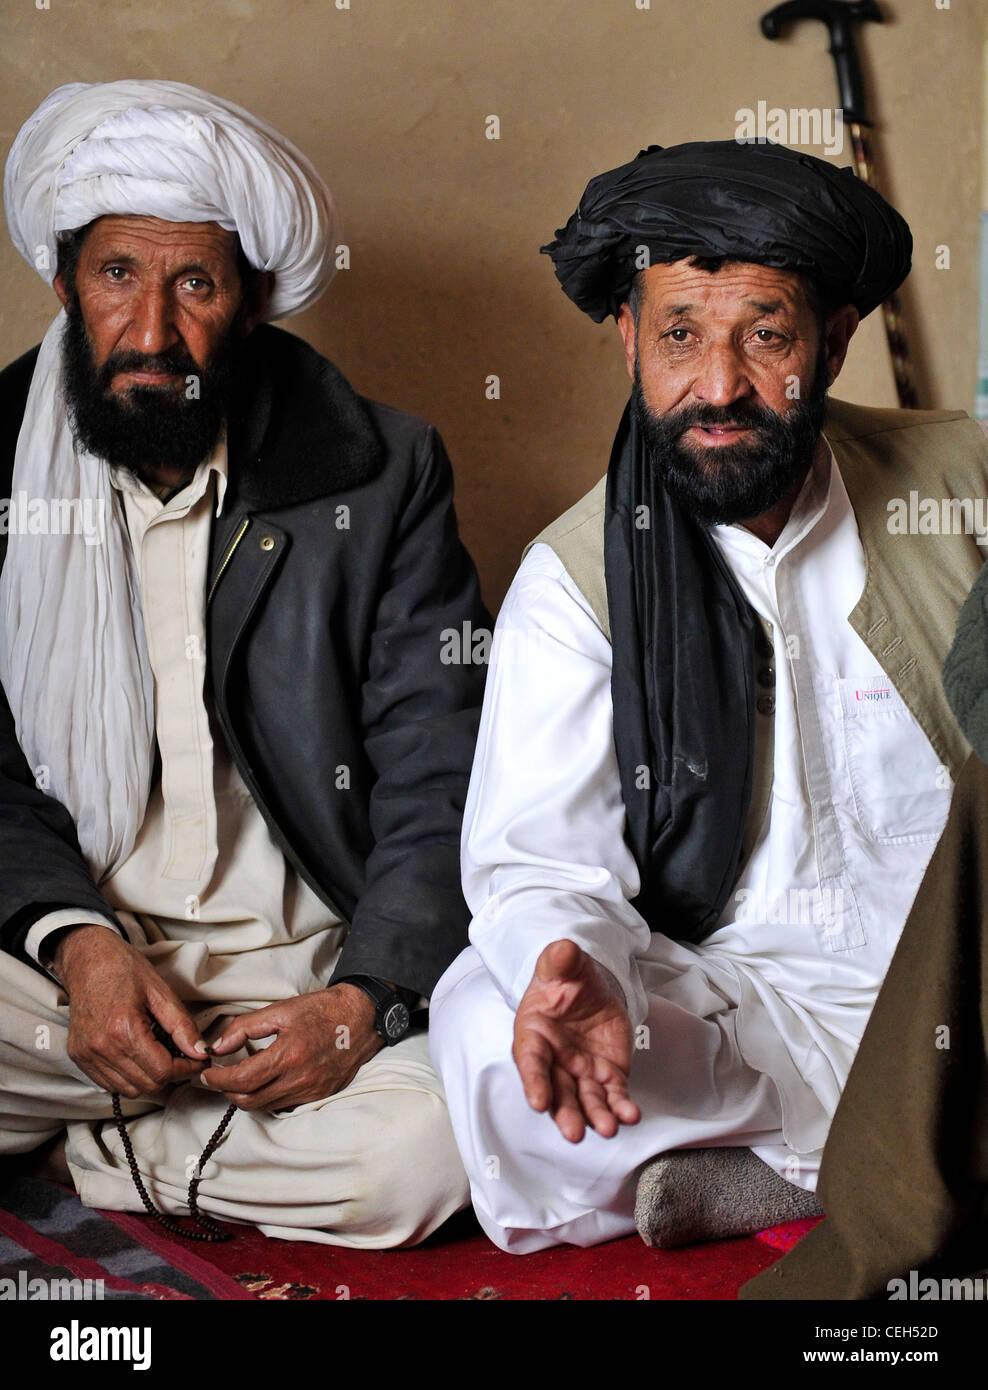 A village elder speaks to members of the Afghan Local Police during a shura held in Shah Joy district, Zabul province, Afghanistan, Feb. 11. The ALP actively work with village elders to promote security and stability throughout the region. Stock Photo